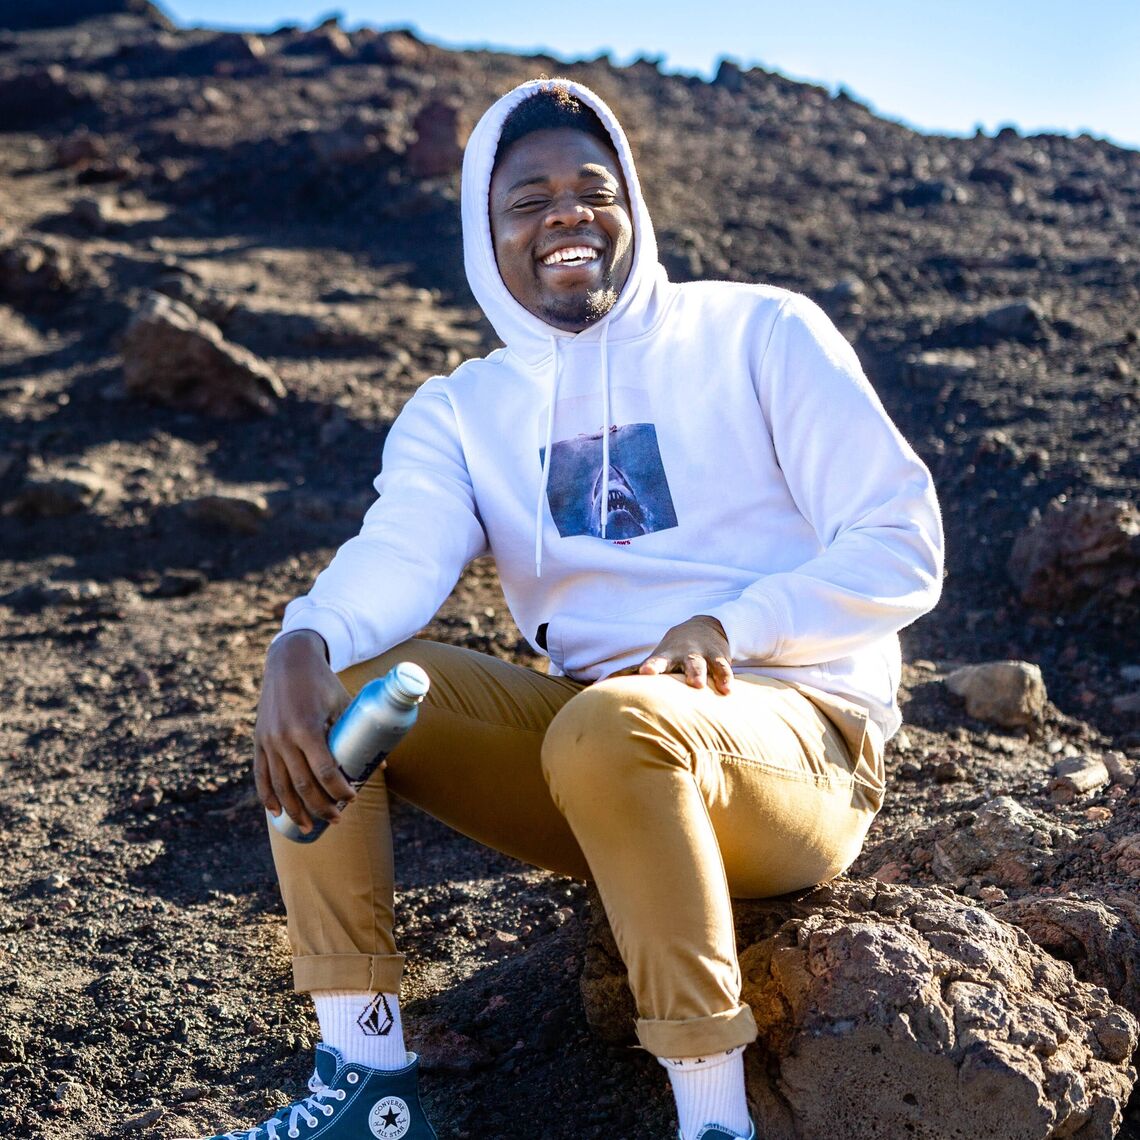 Ojima Abraham in Hawaii, where he traveled with Assistant Professor of Physics Ryan Trainor for his research related to the James Webb Space Telescope (JWST), recently launched into space, and Hawaii's W. M. Keck Observatory.